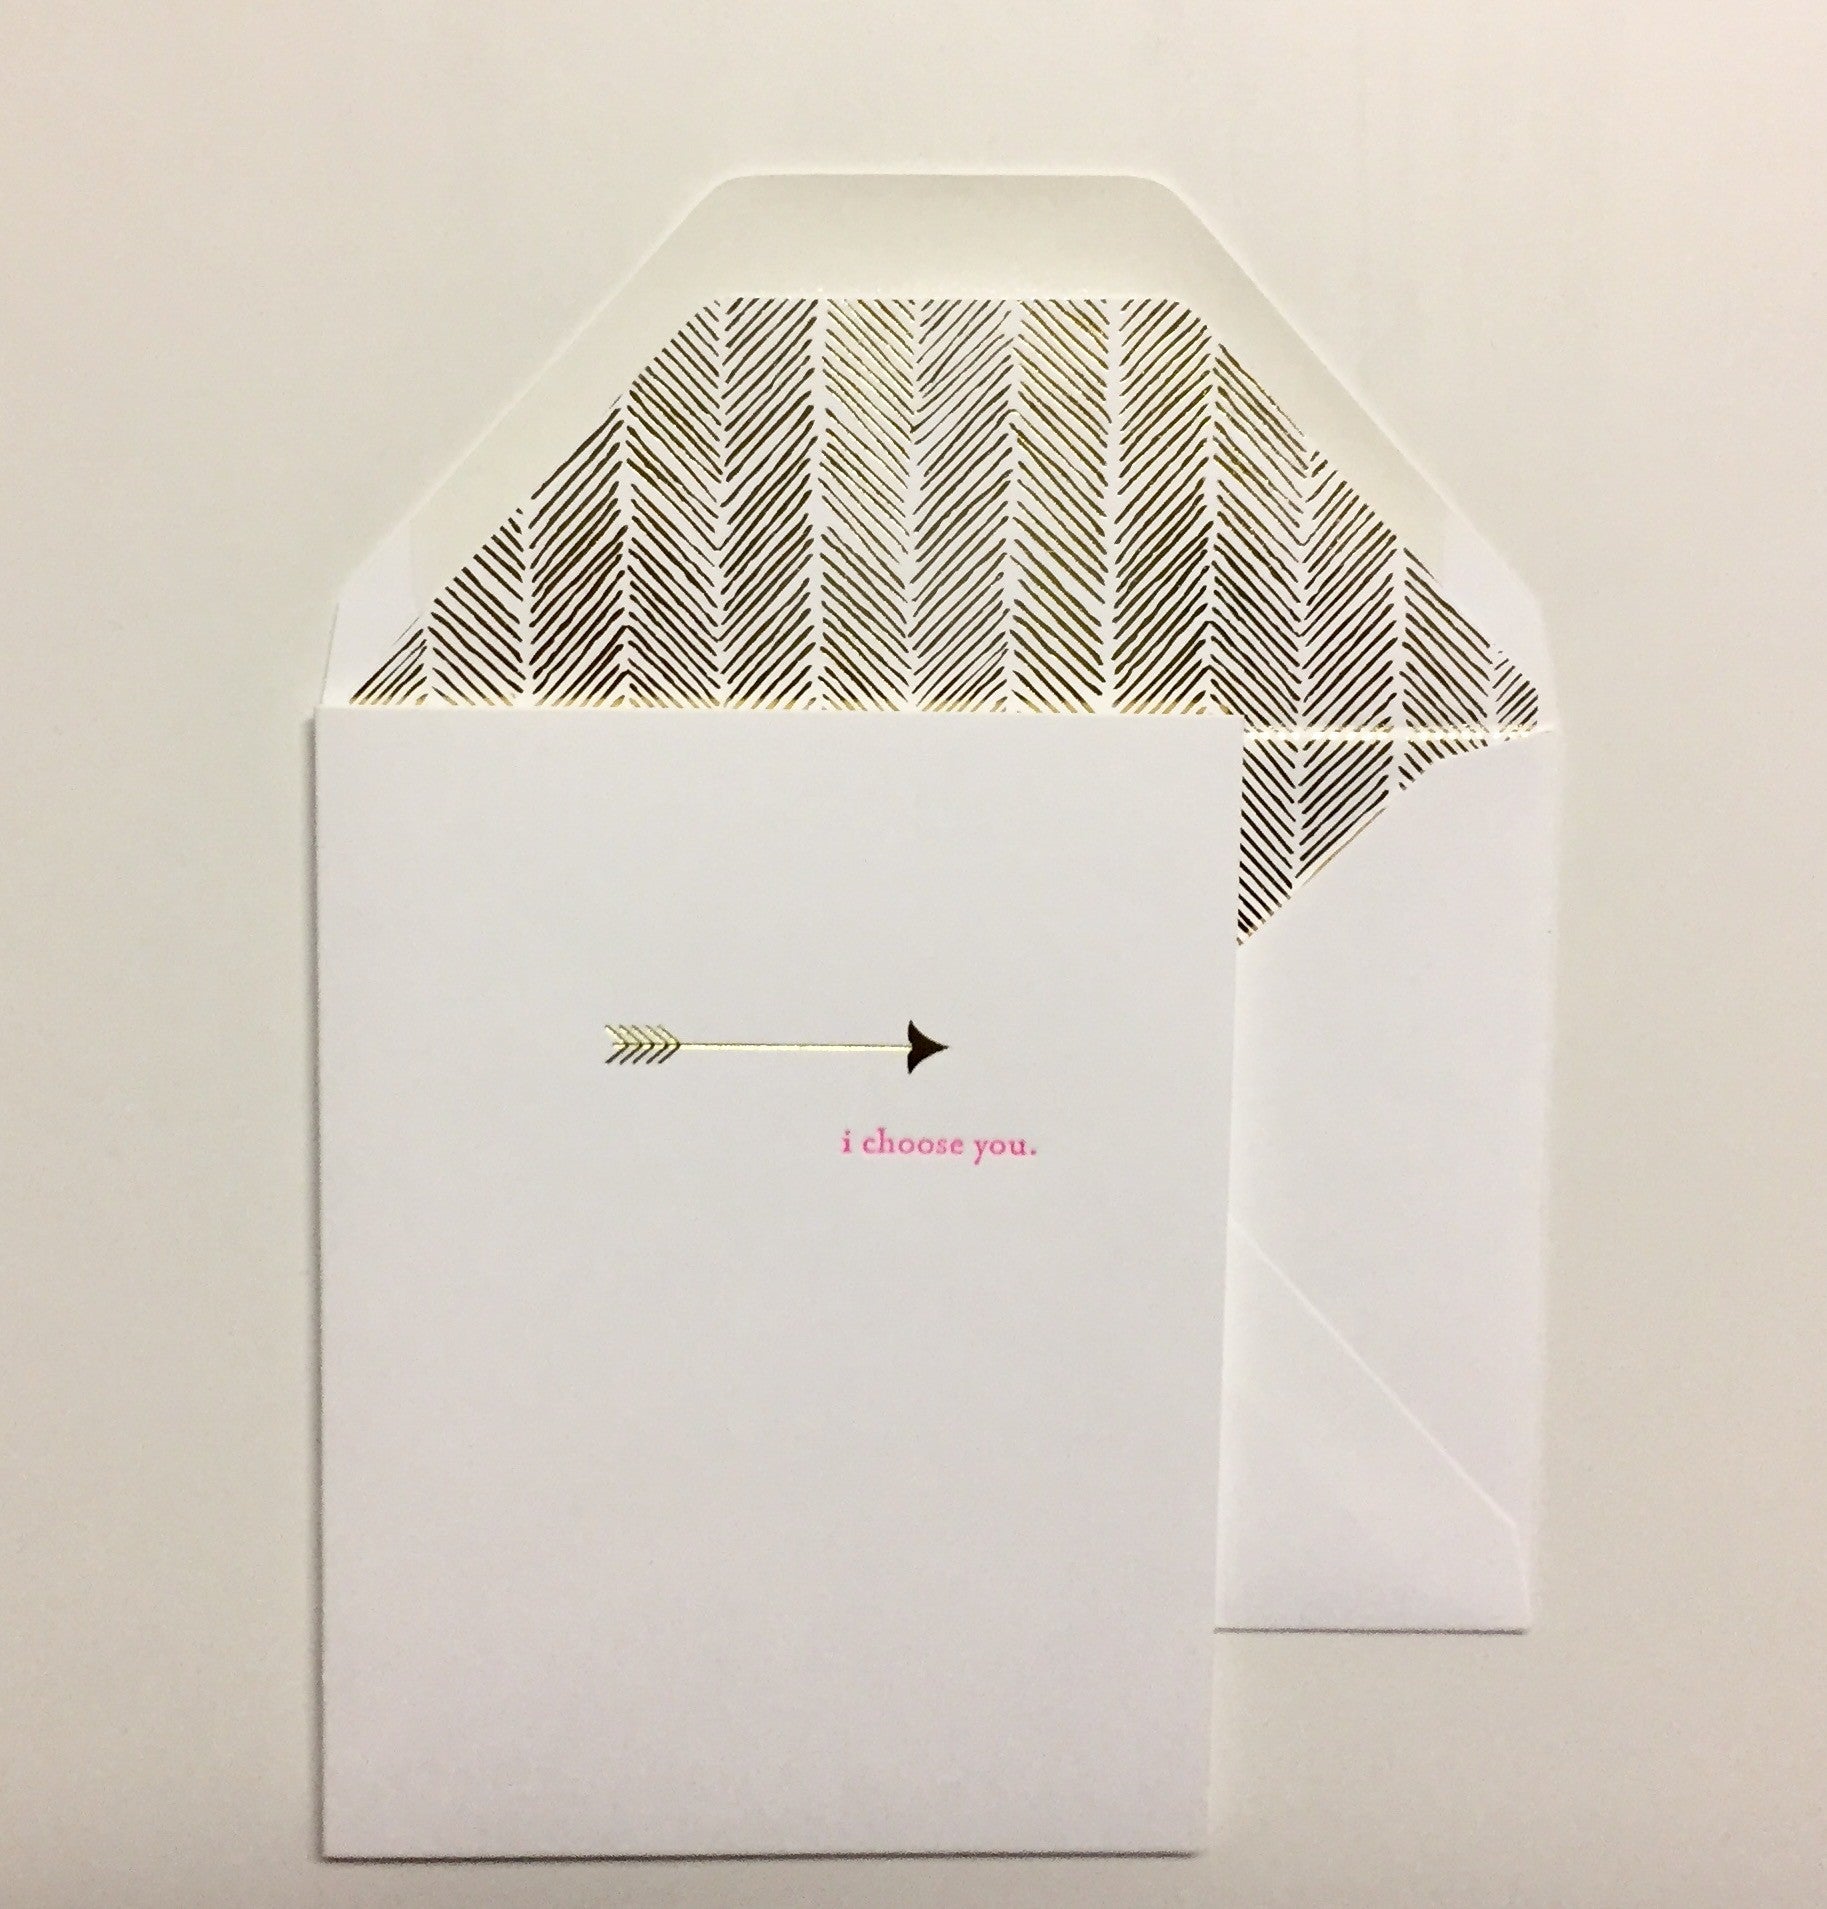 Love and Valentine's Day from Sugar Paper Cards